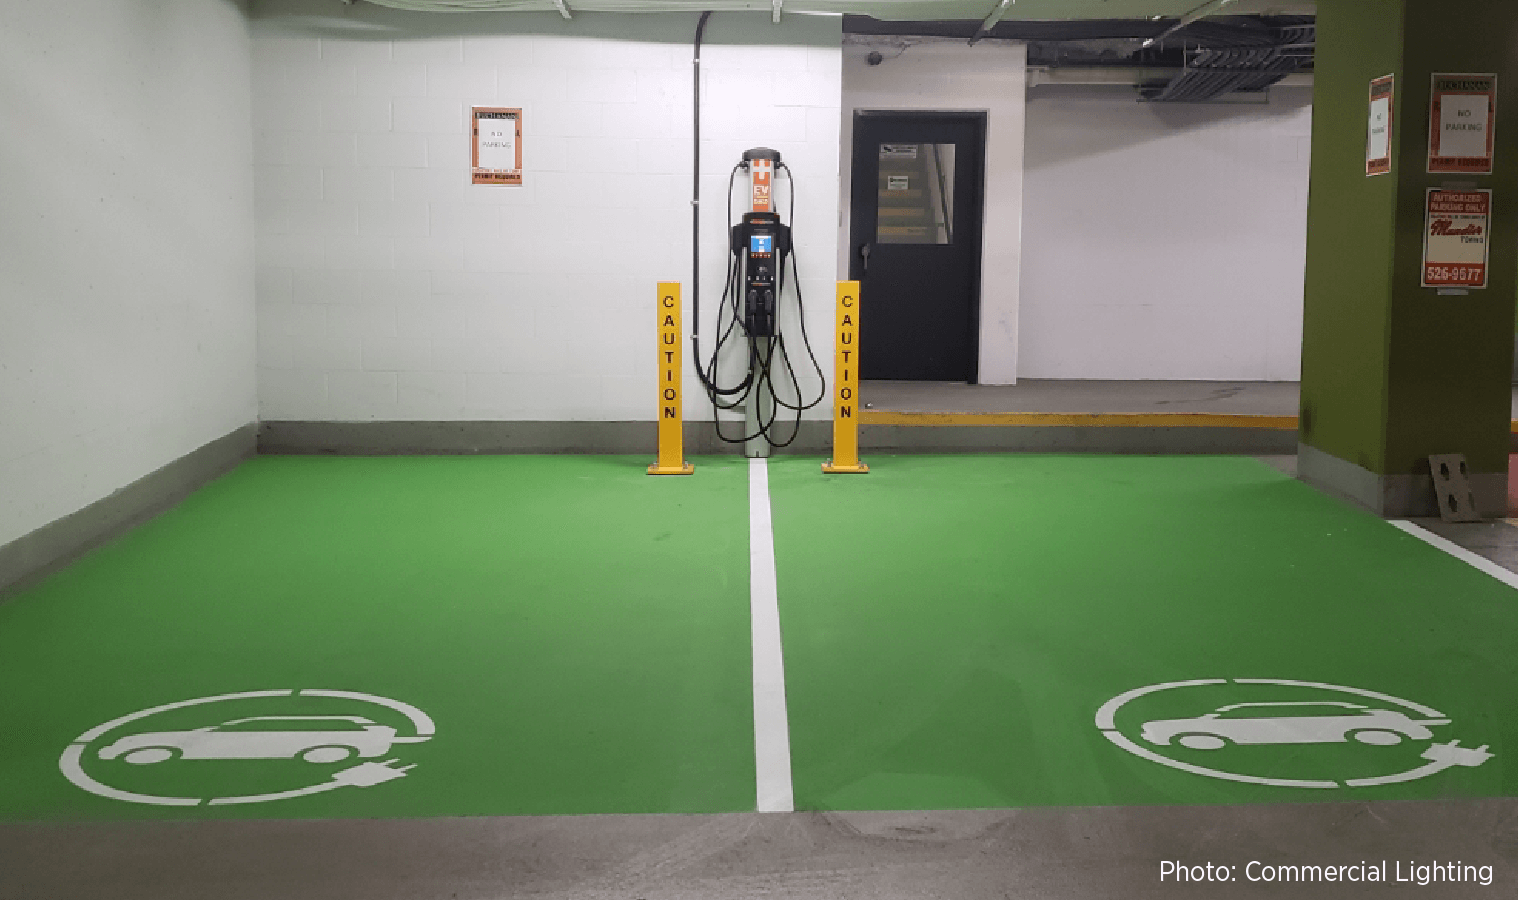 ChargePoint charging station in a parking garage